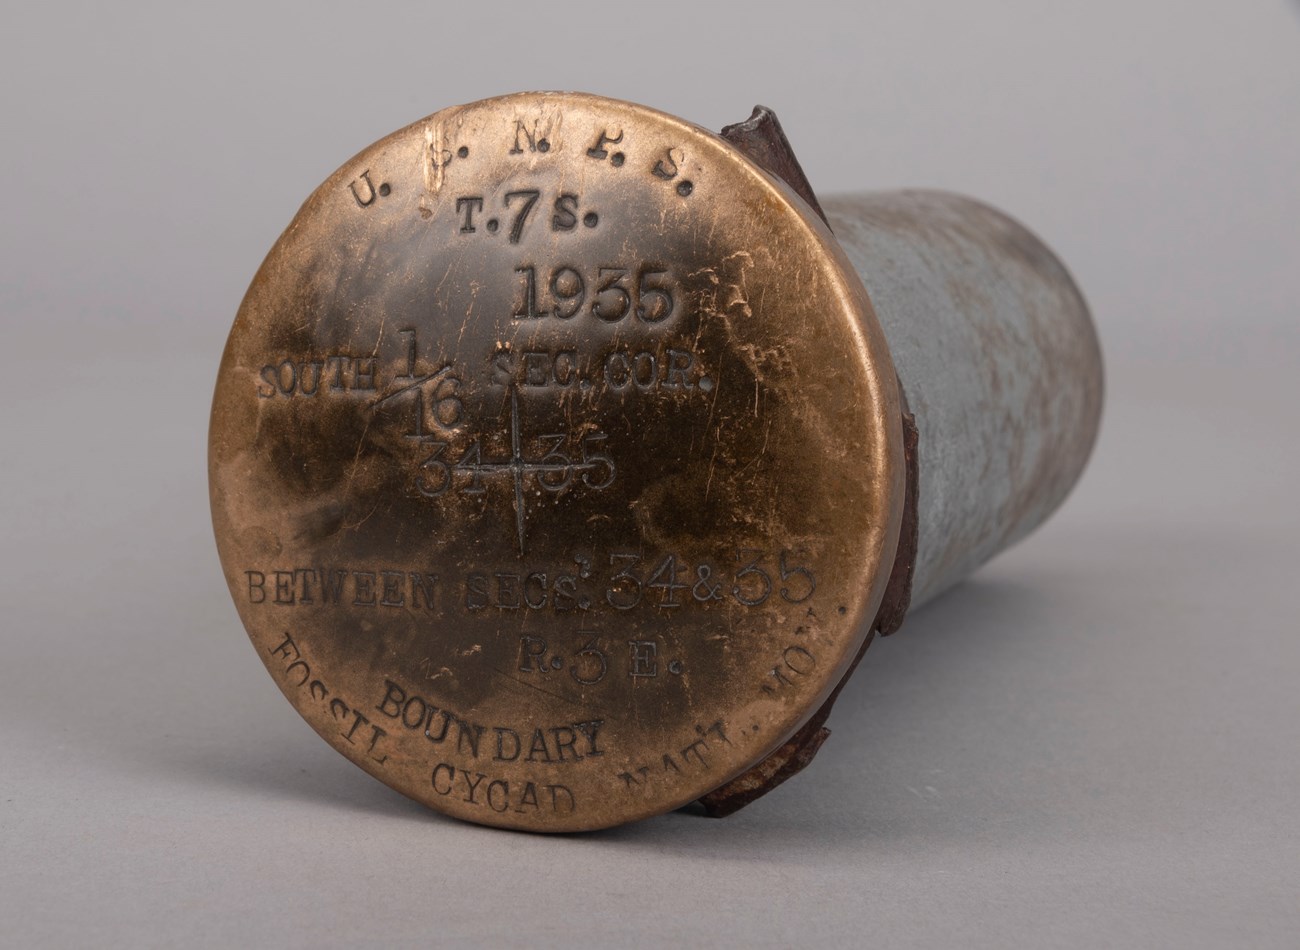 Round bronze marker cap NPS and Fossil Cycad National Monument and 1935 date.